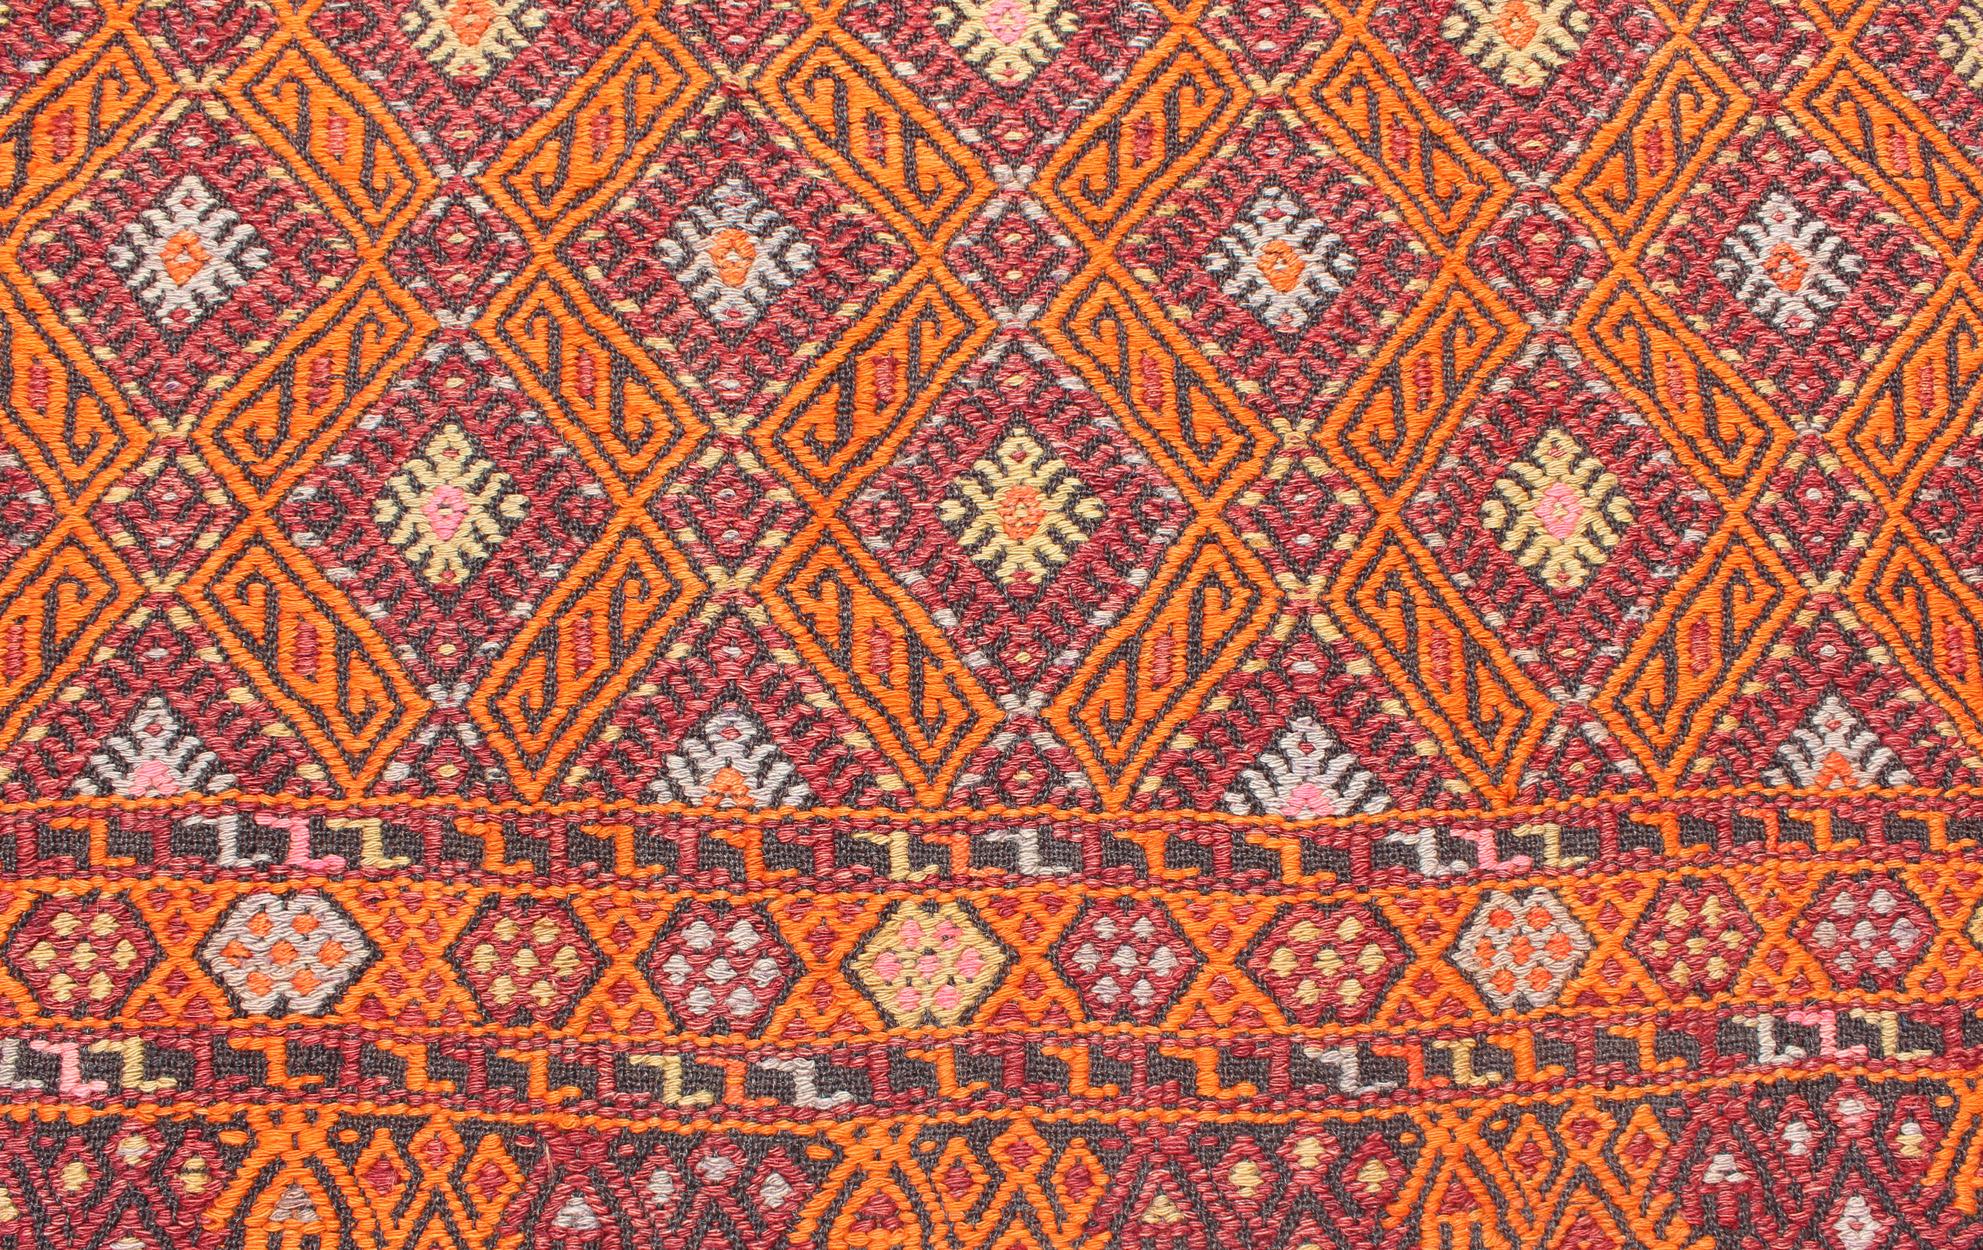 Mid-20th Century Vintage Embroidered Kilim in Orange, Red, light Blue and yellow Colors